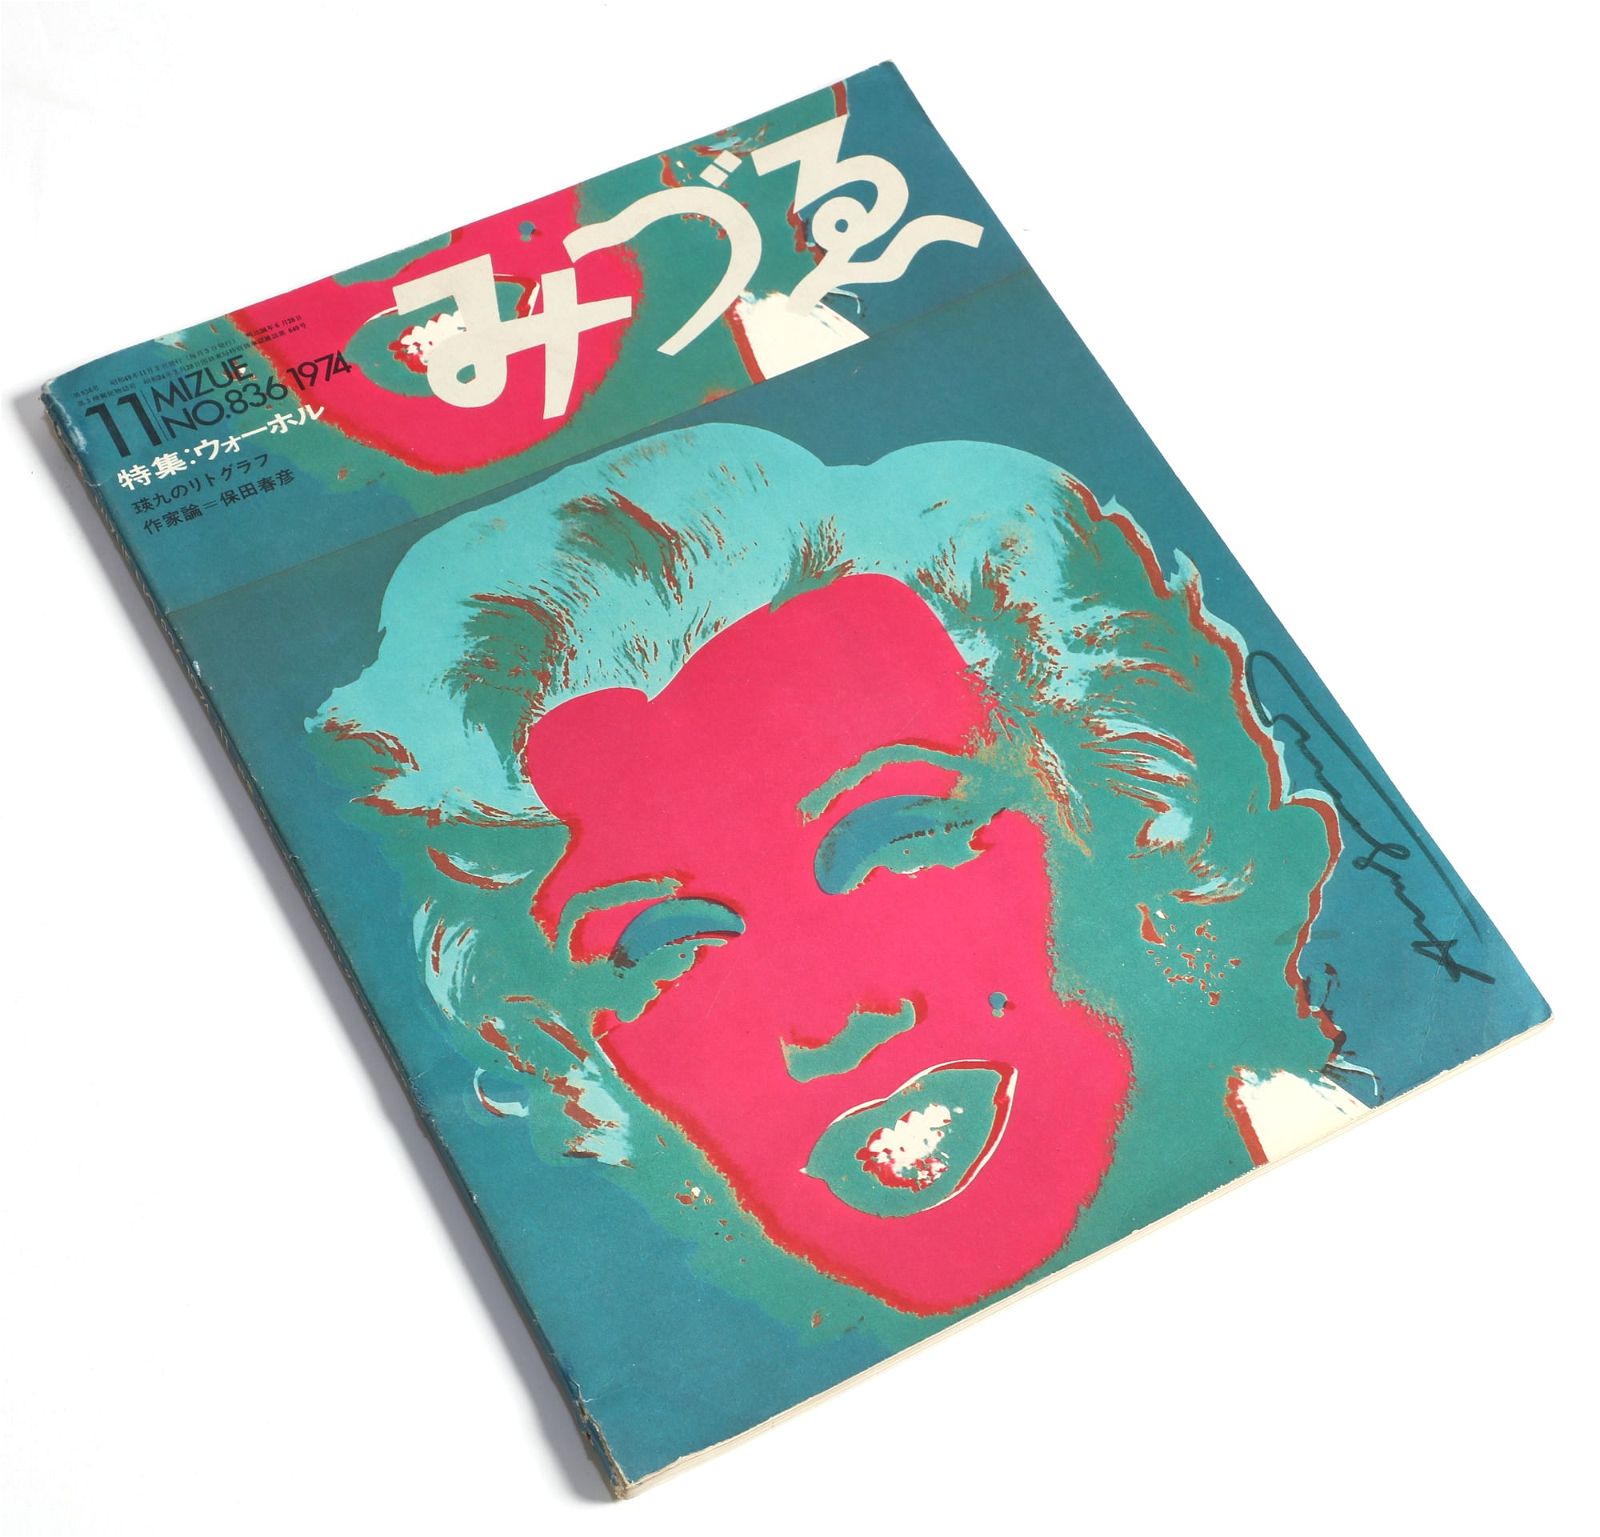 AN ANDY WARHOL SIGNED COPY OF MIZUEAn